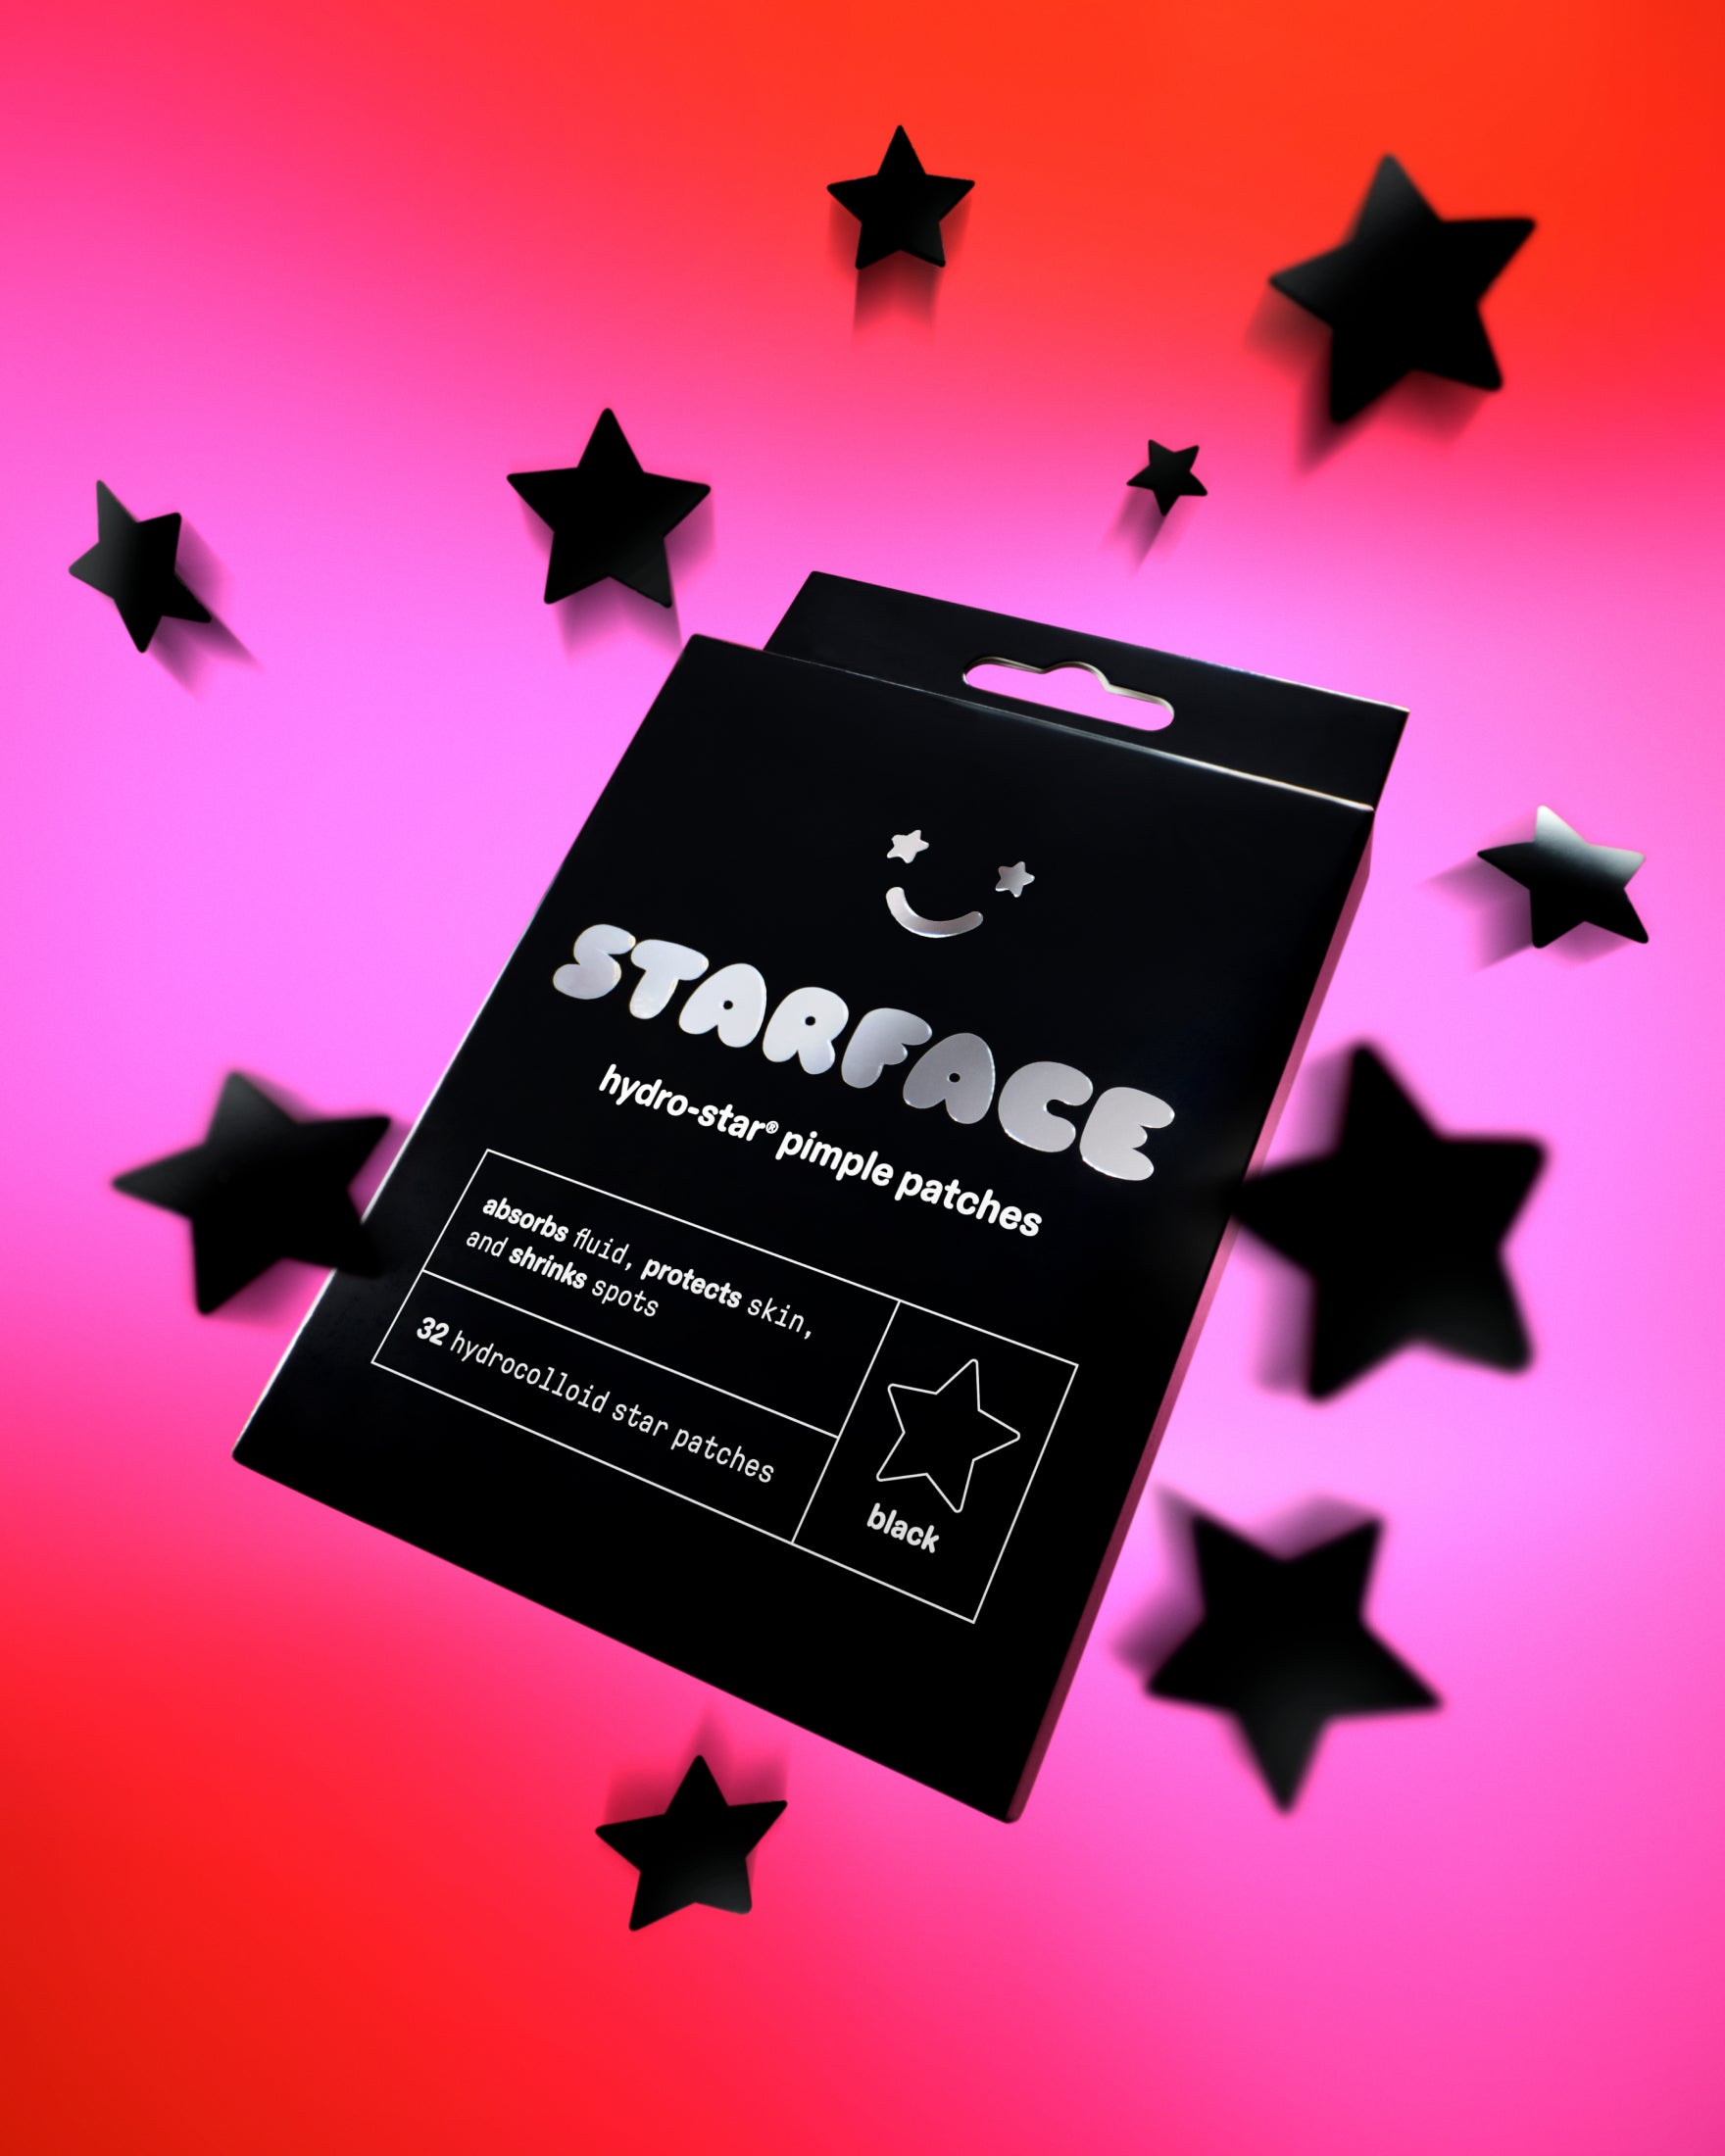 A package of black Hydro-Star® pimple patches on a pink background with floating black stars.